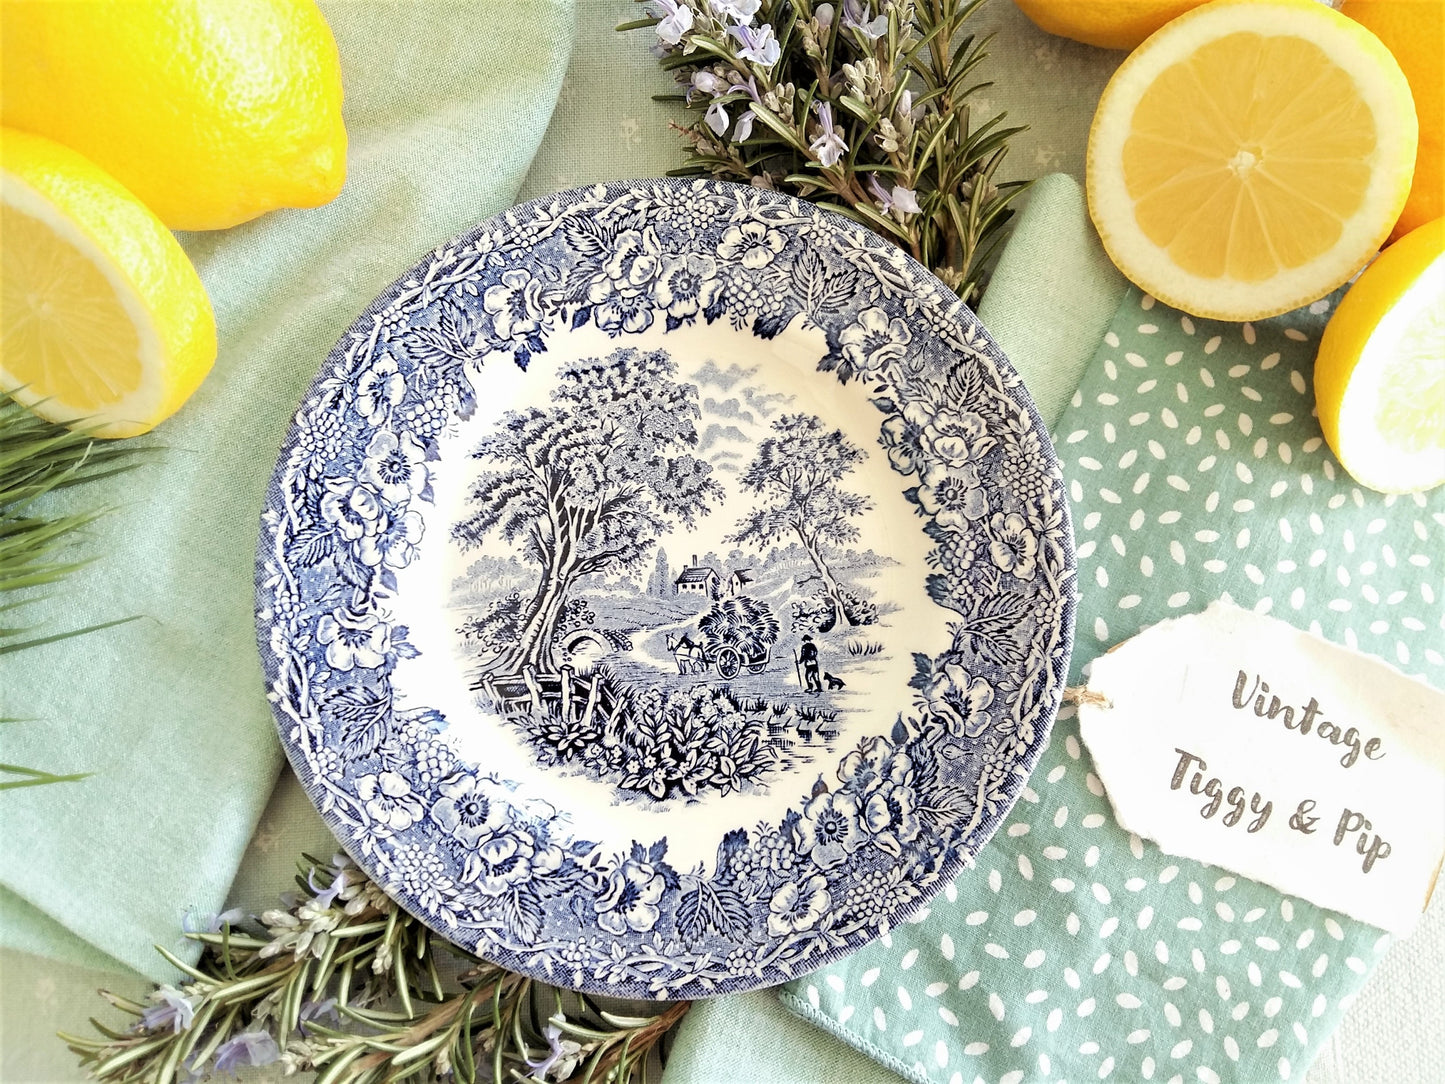 Eight Mismatched Blue and White Plates from Tiggy & Pip - €199.00! Shop now at Tiggy and Pip